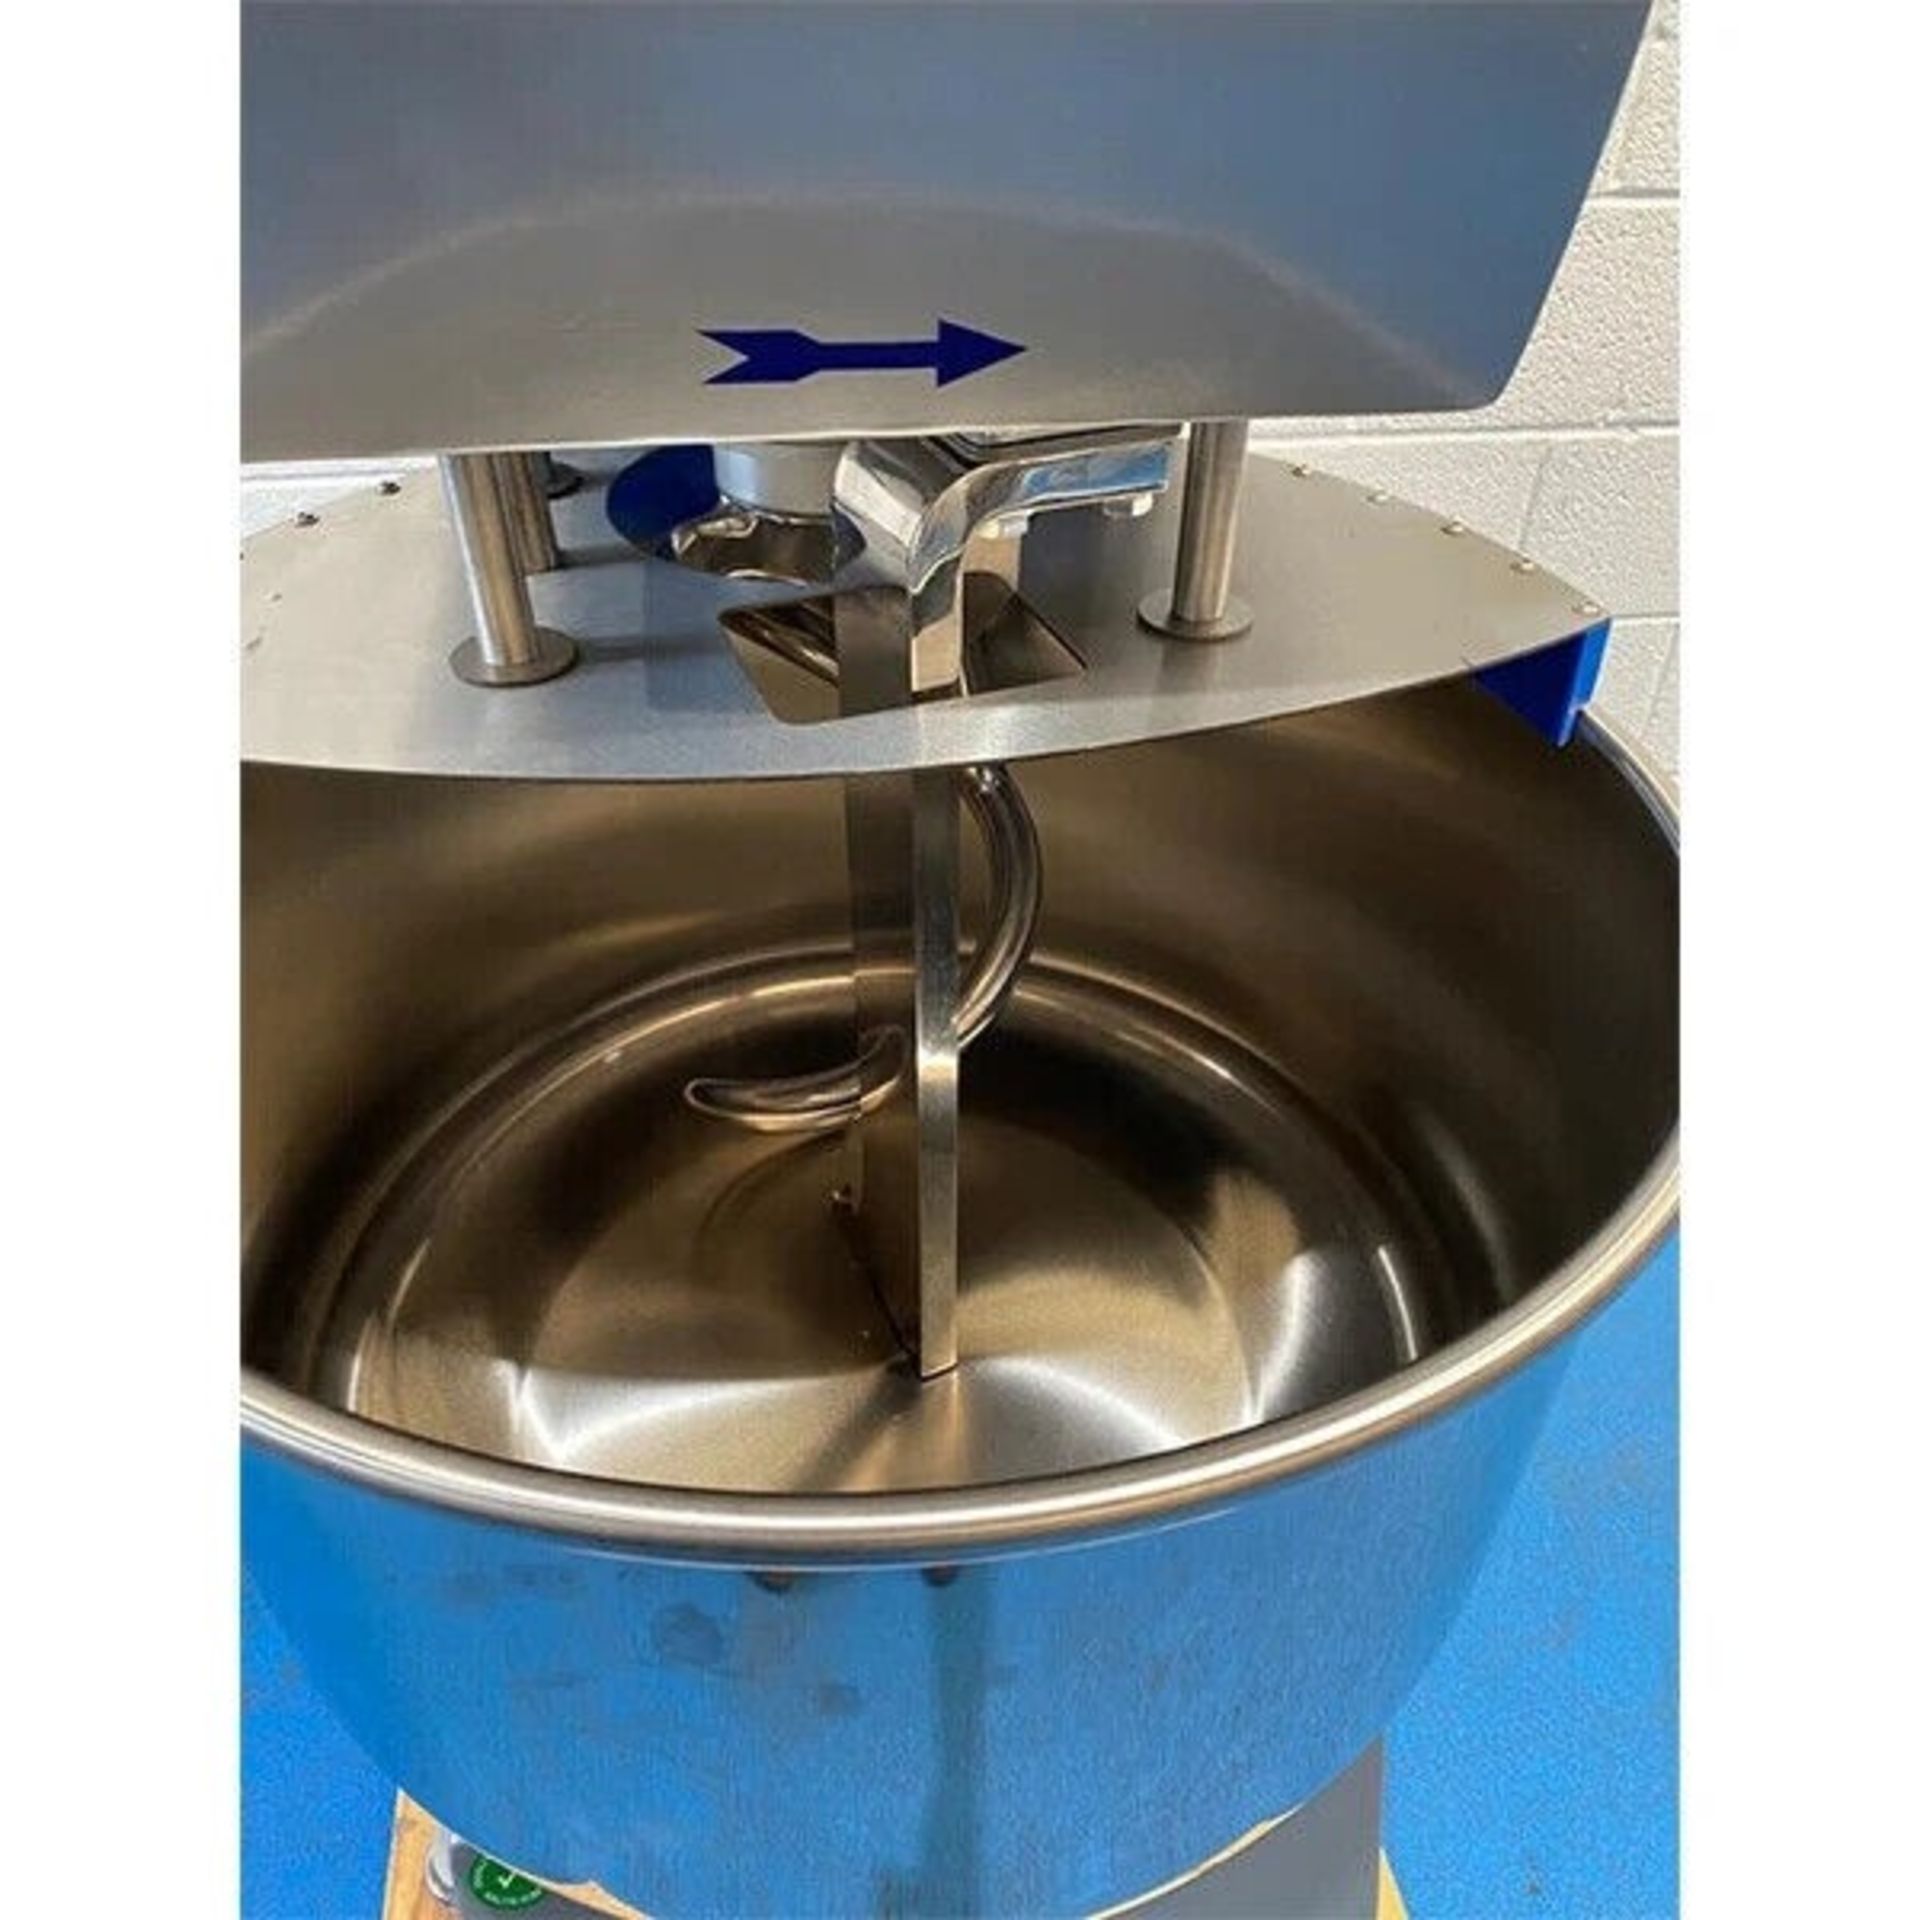 ATS 60 kg Spiral Dough Mixer (Located Jessup, MD) (Loading Fee $150) - Image 3 of 4